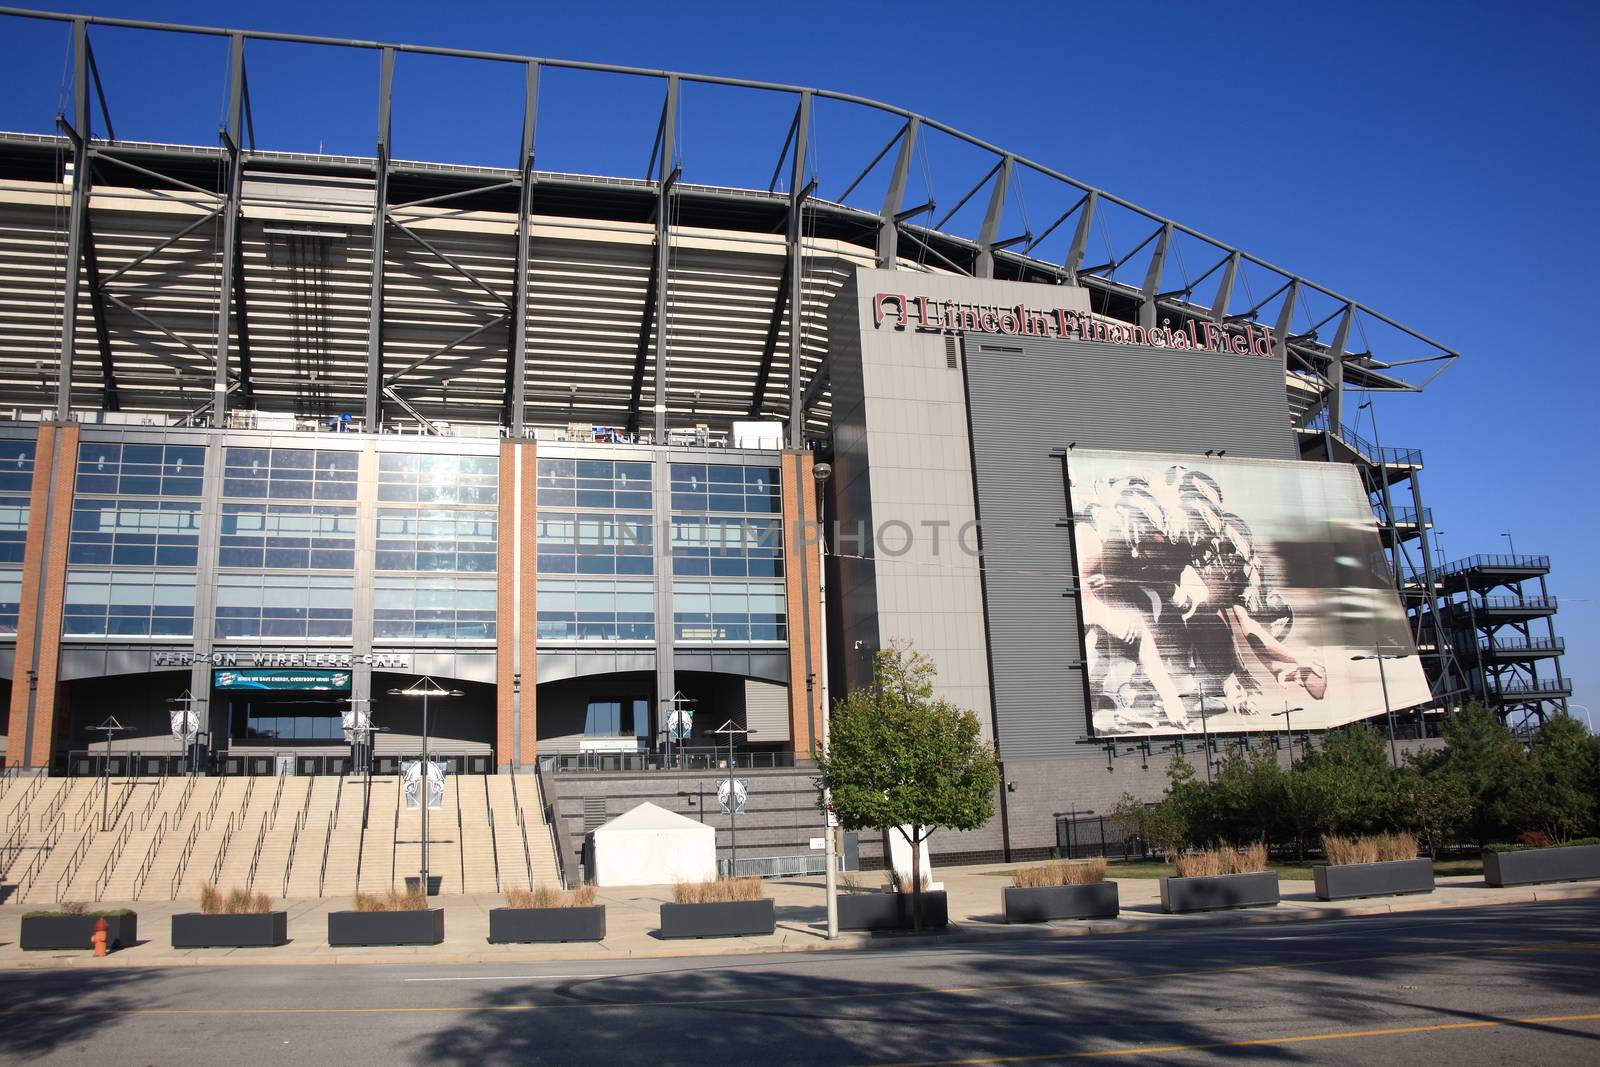 Lincoln Financial Field, home of the NFL Football Eagles, located in the South Philadelphia sports complex.